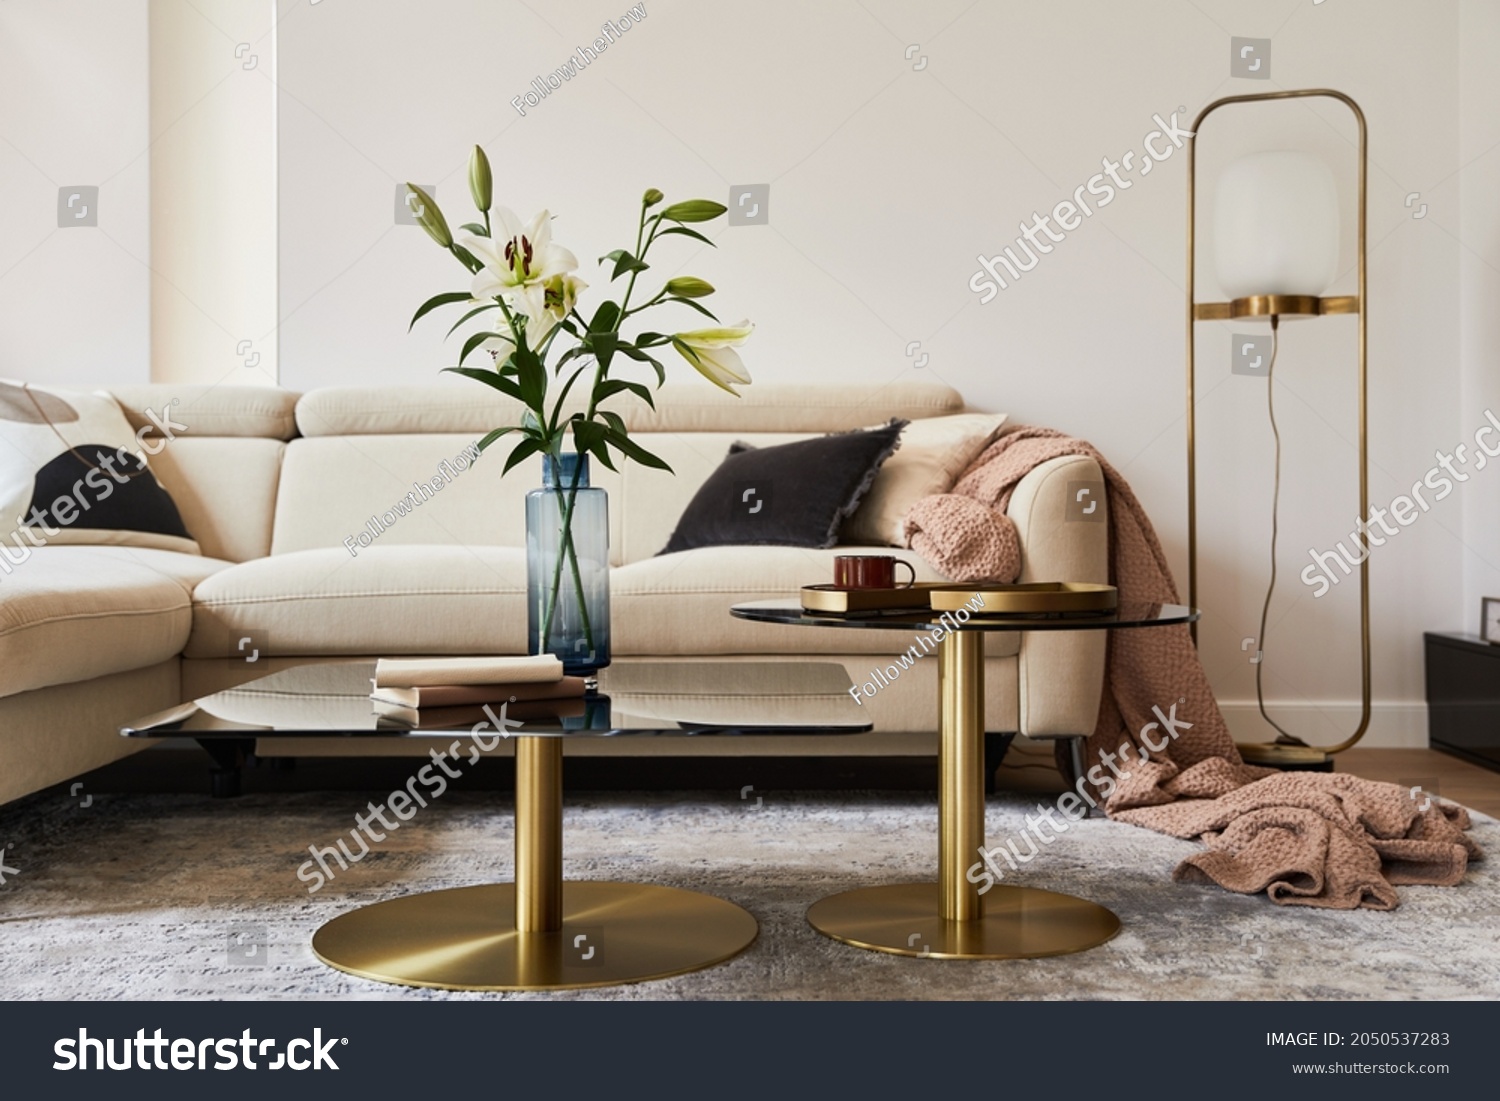 Stylish living room interior composition with beige sofa, glass coffee table, carpet on the floor and glamorous accessories. Template. #2050537283